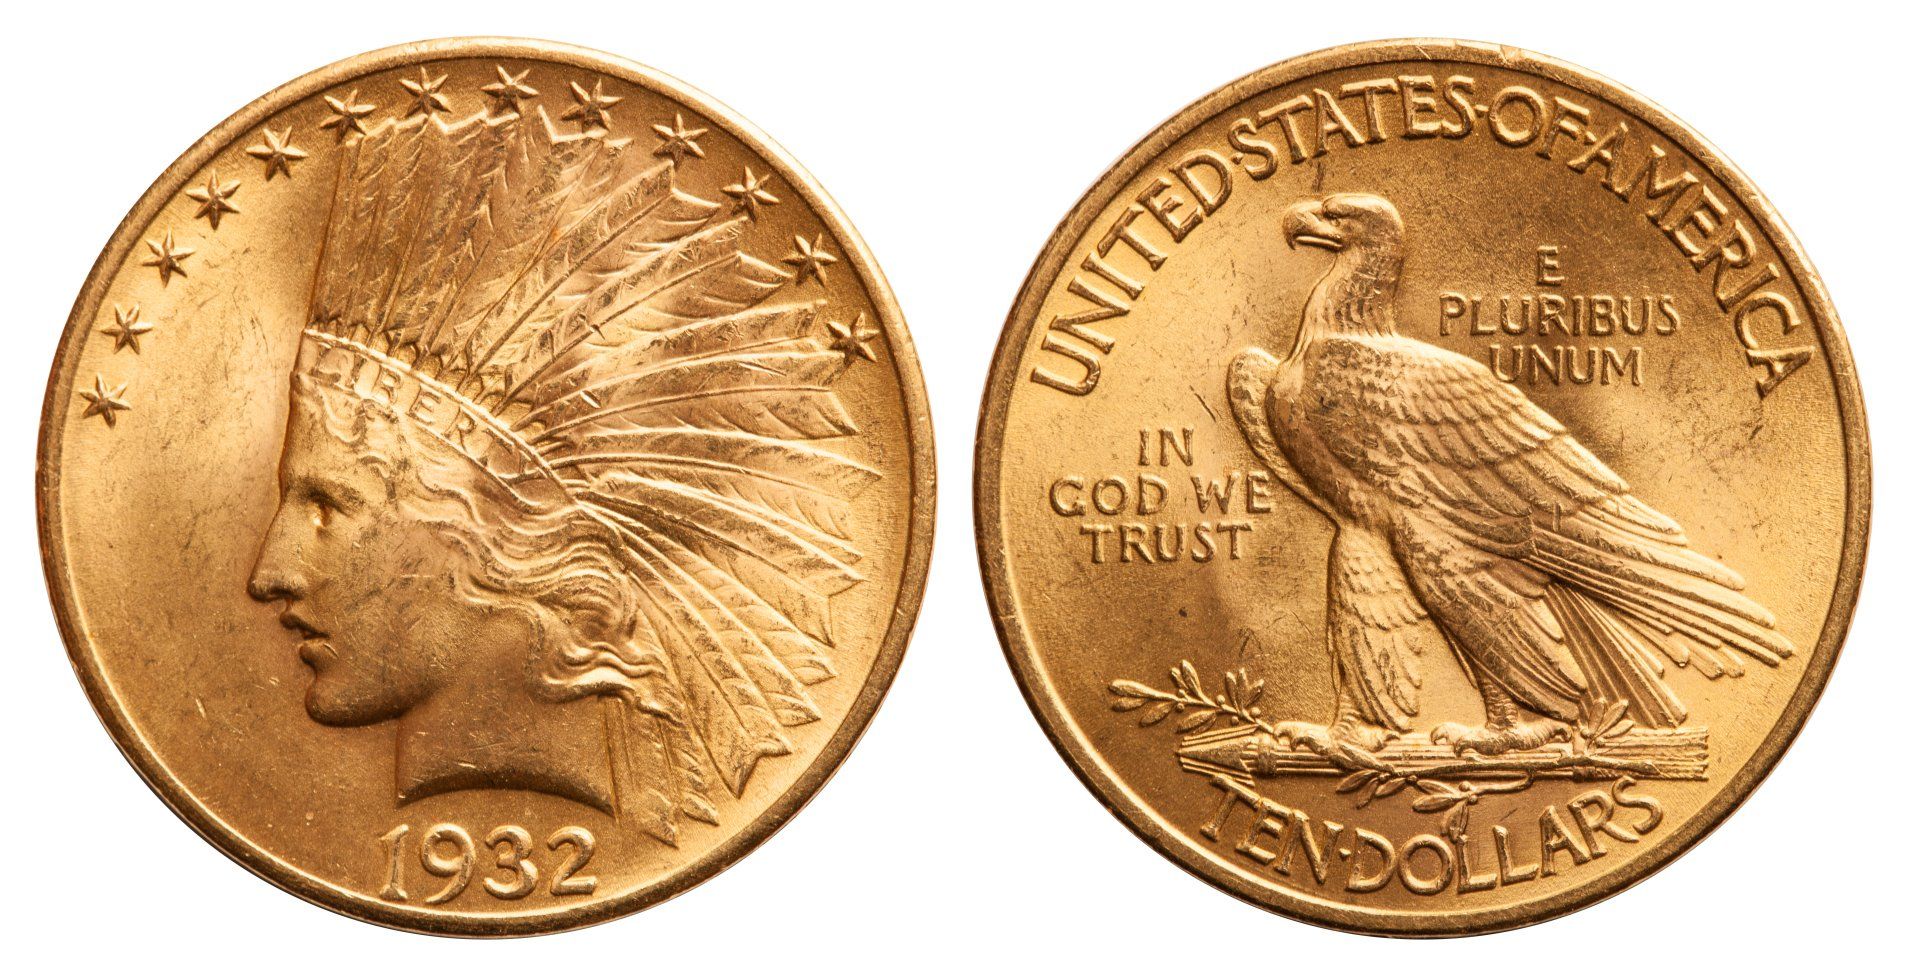 1932 Indian Head Gold Eagle obverse and reverse